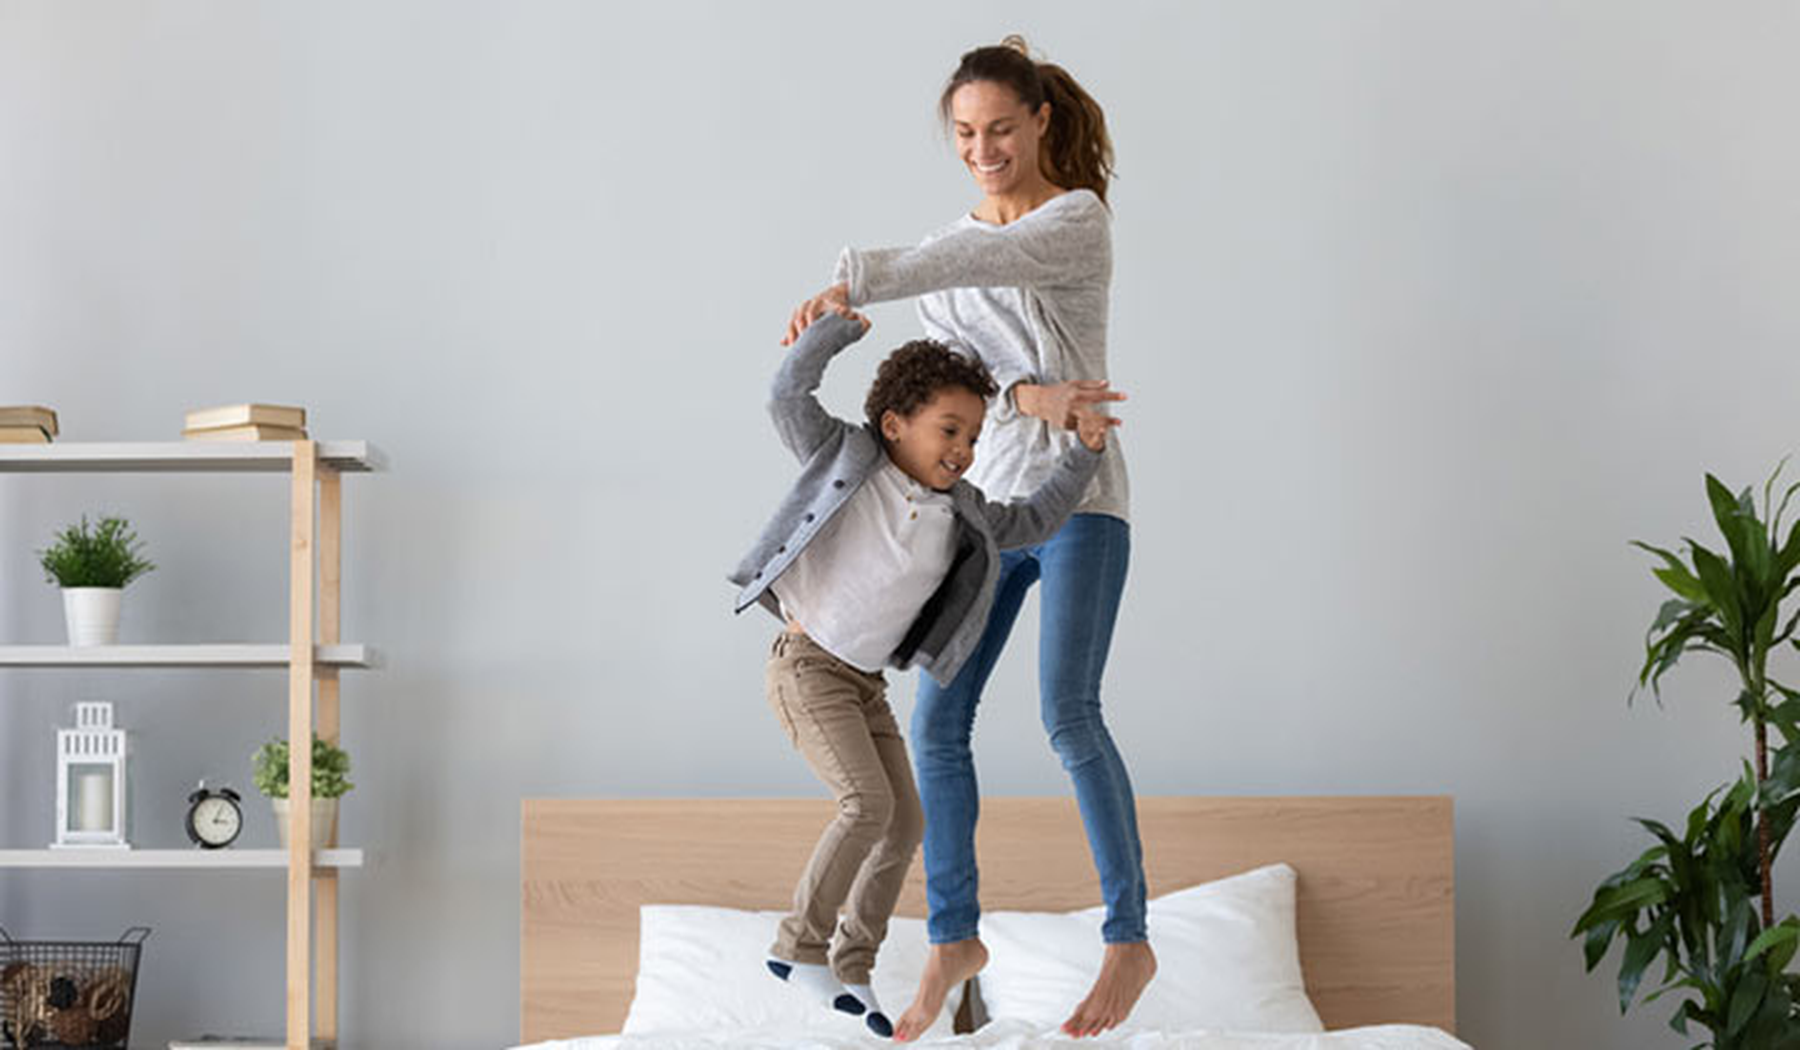 Happy mom and son jumping on a bed